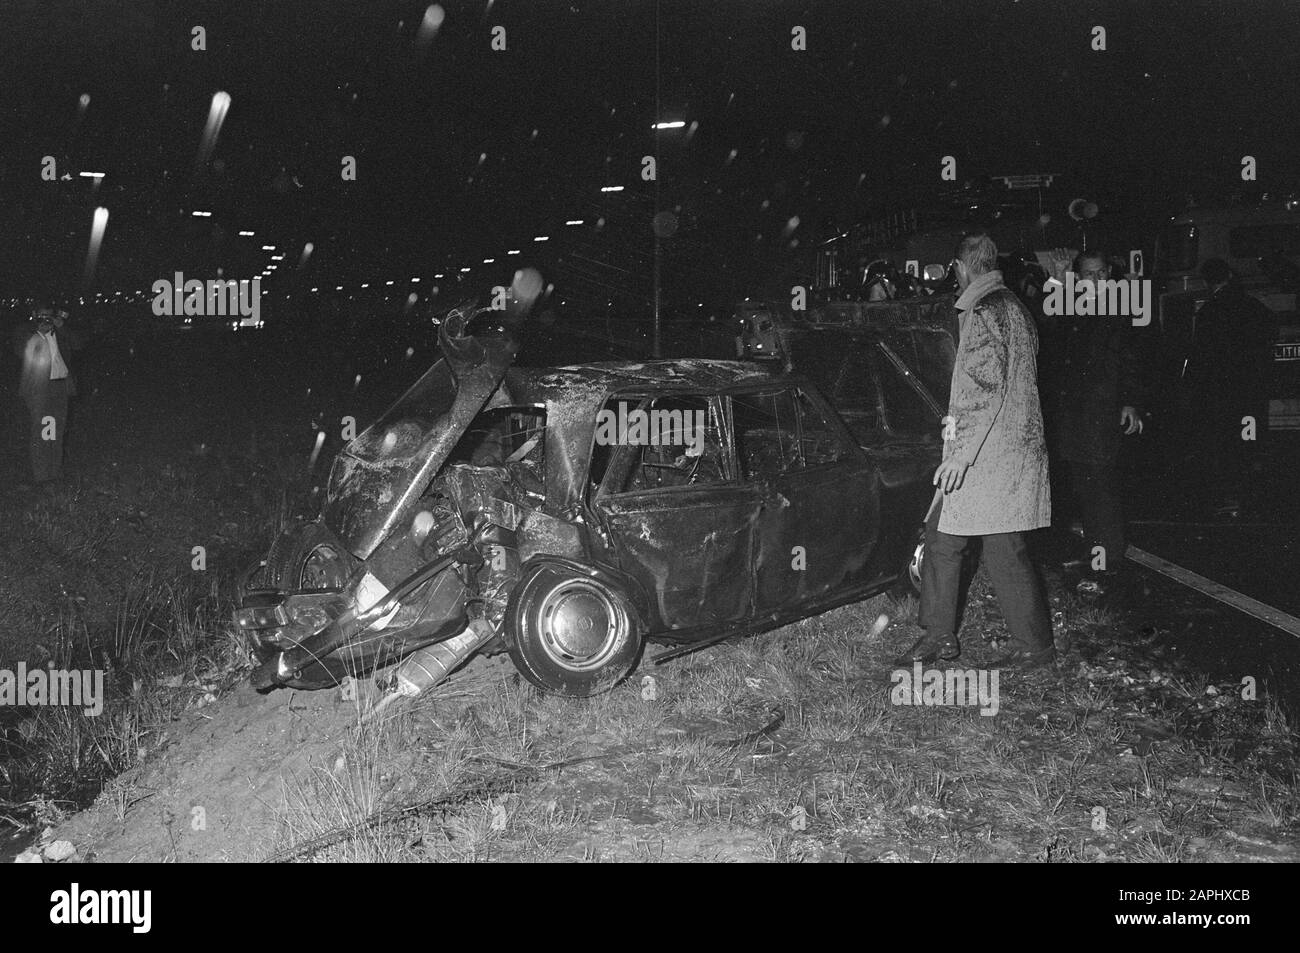 Burnt out car Description: The remnants of the Fiat 124, at Hoogweg. The accident cost a person's life Date: September 15, 1968 Keywords: car wrecks, fires Stock Photo